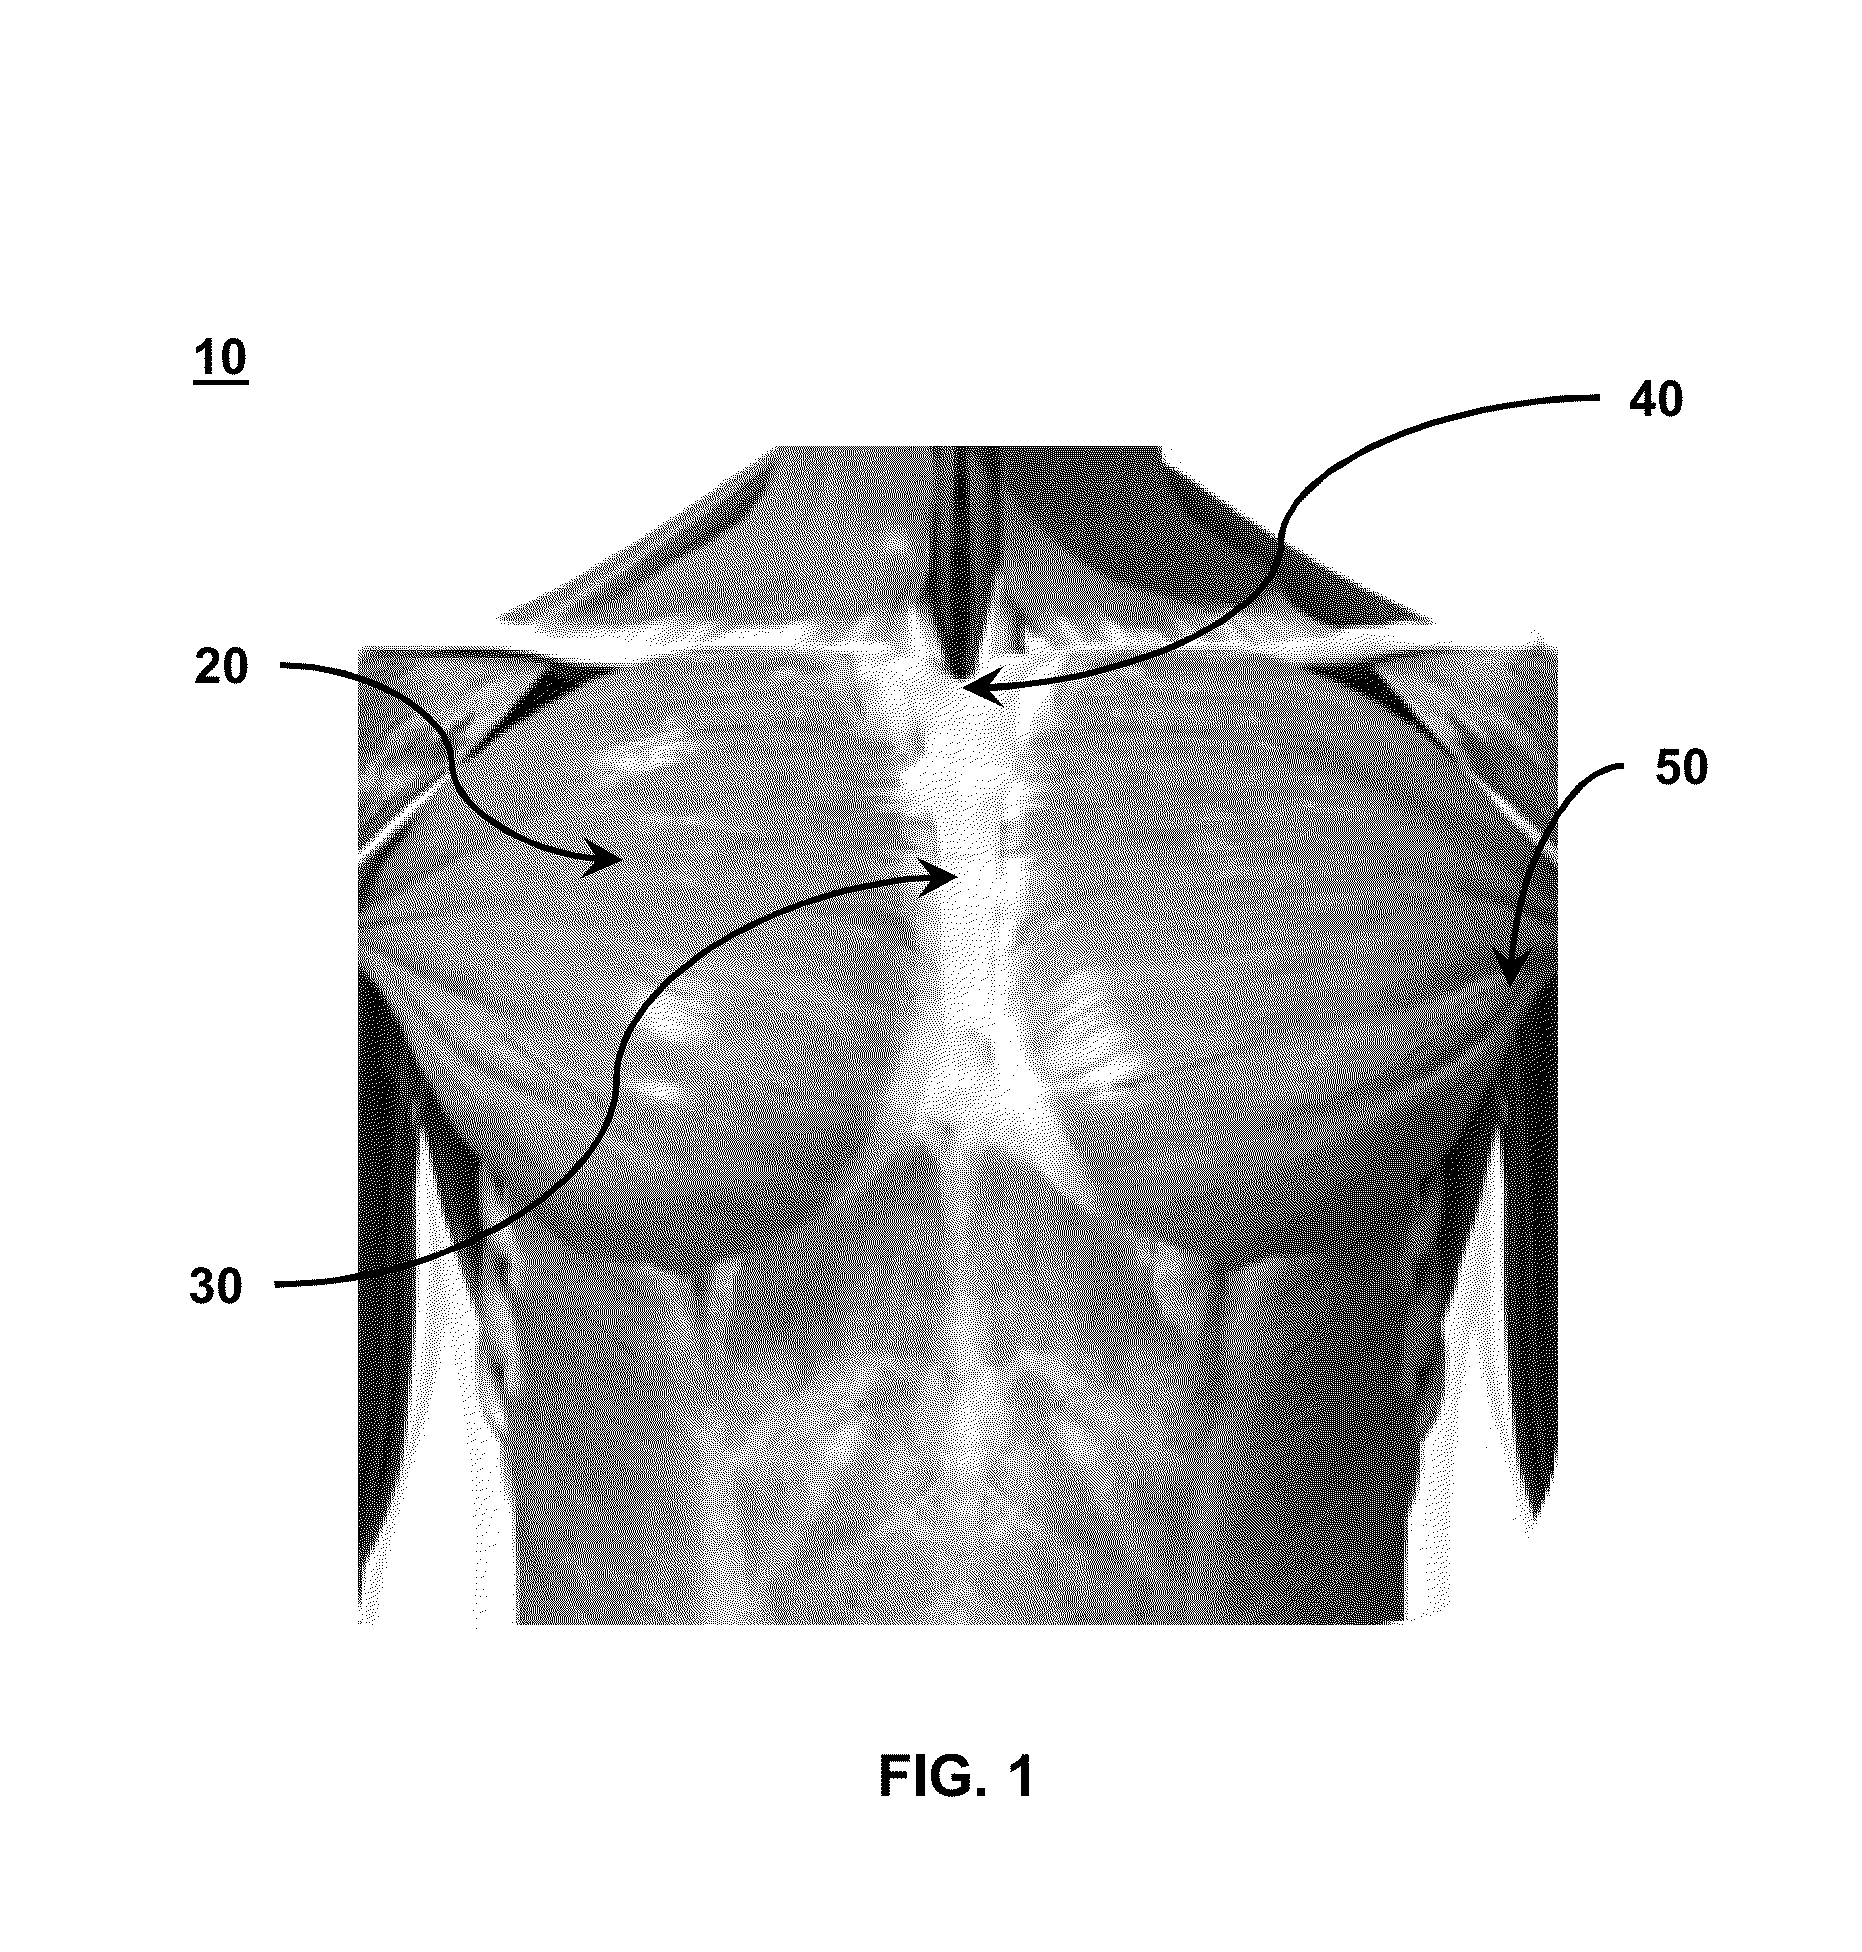 Pressure sensitive assemblies for limiting movements adverse to health or surgical recovery